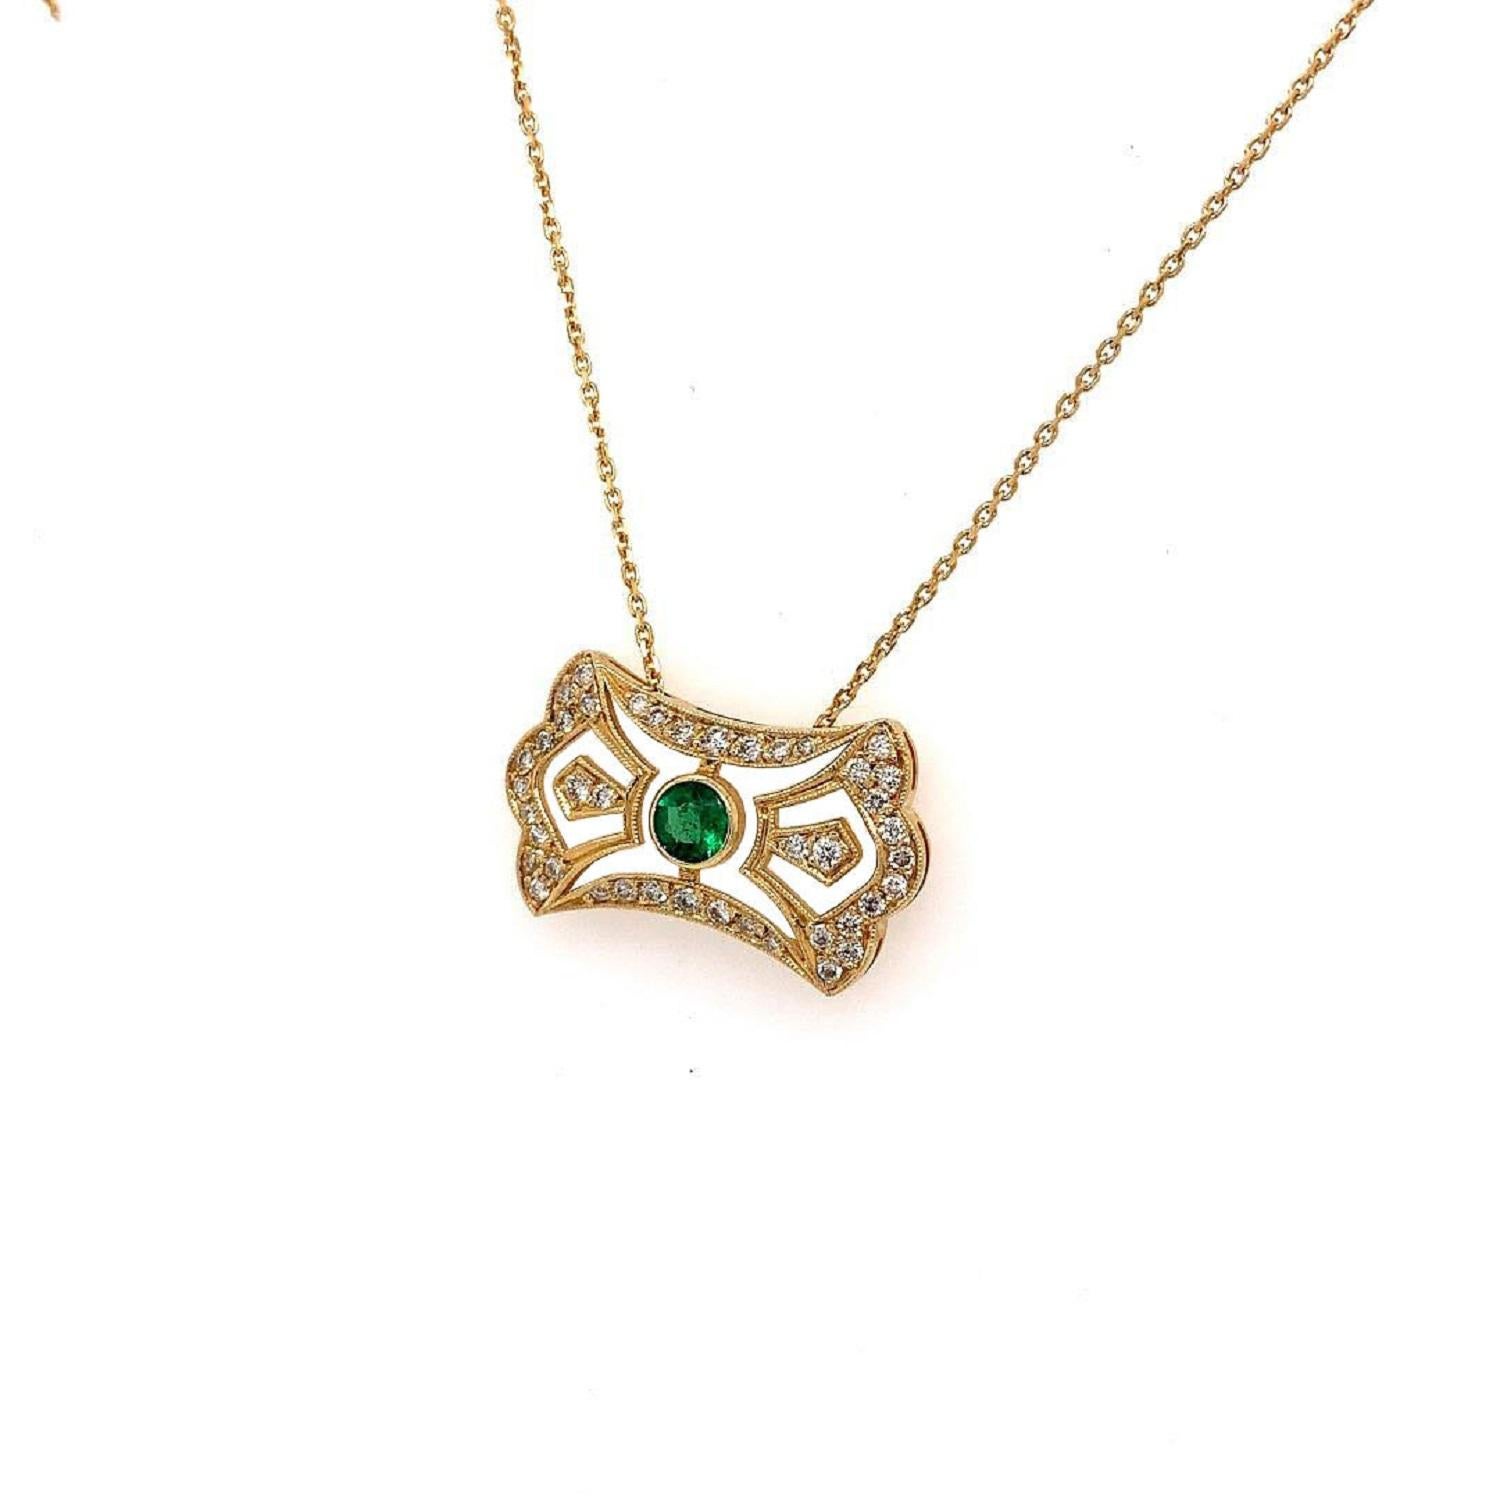 OWN Your Story 14K Rose Gold Emerald and Diamond Horizontal French Shield Necklace

OWN Your Story brings its 3 generations of family tradition and unparalleled experience with 14K gold, diamonds, and gemstones to create high-level jewelry